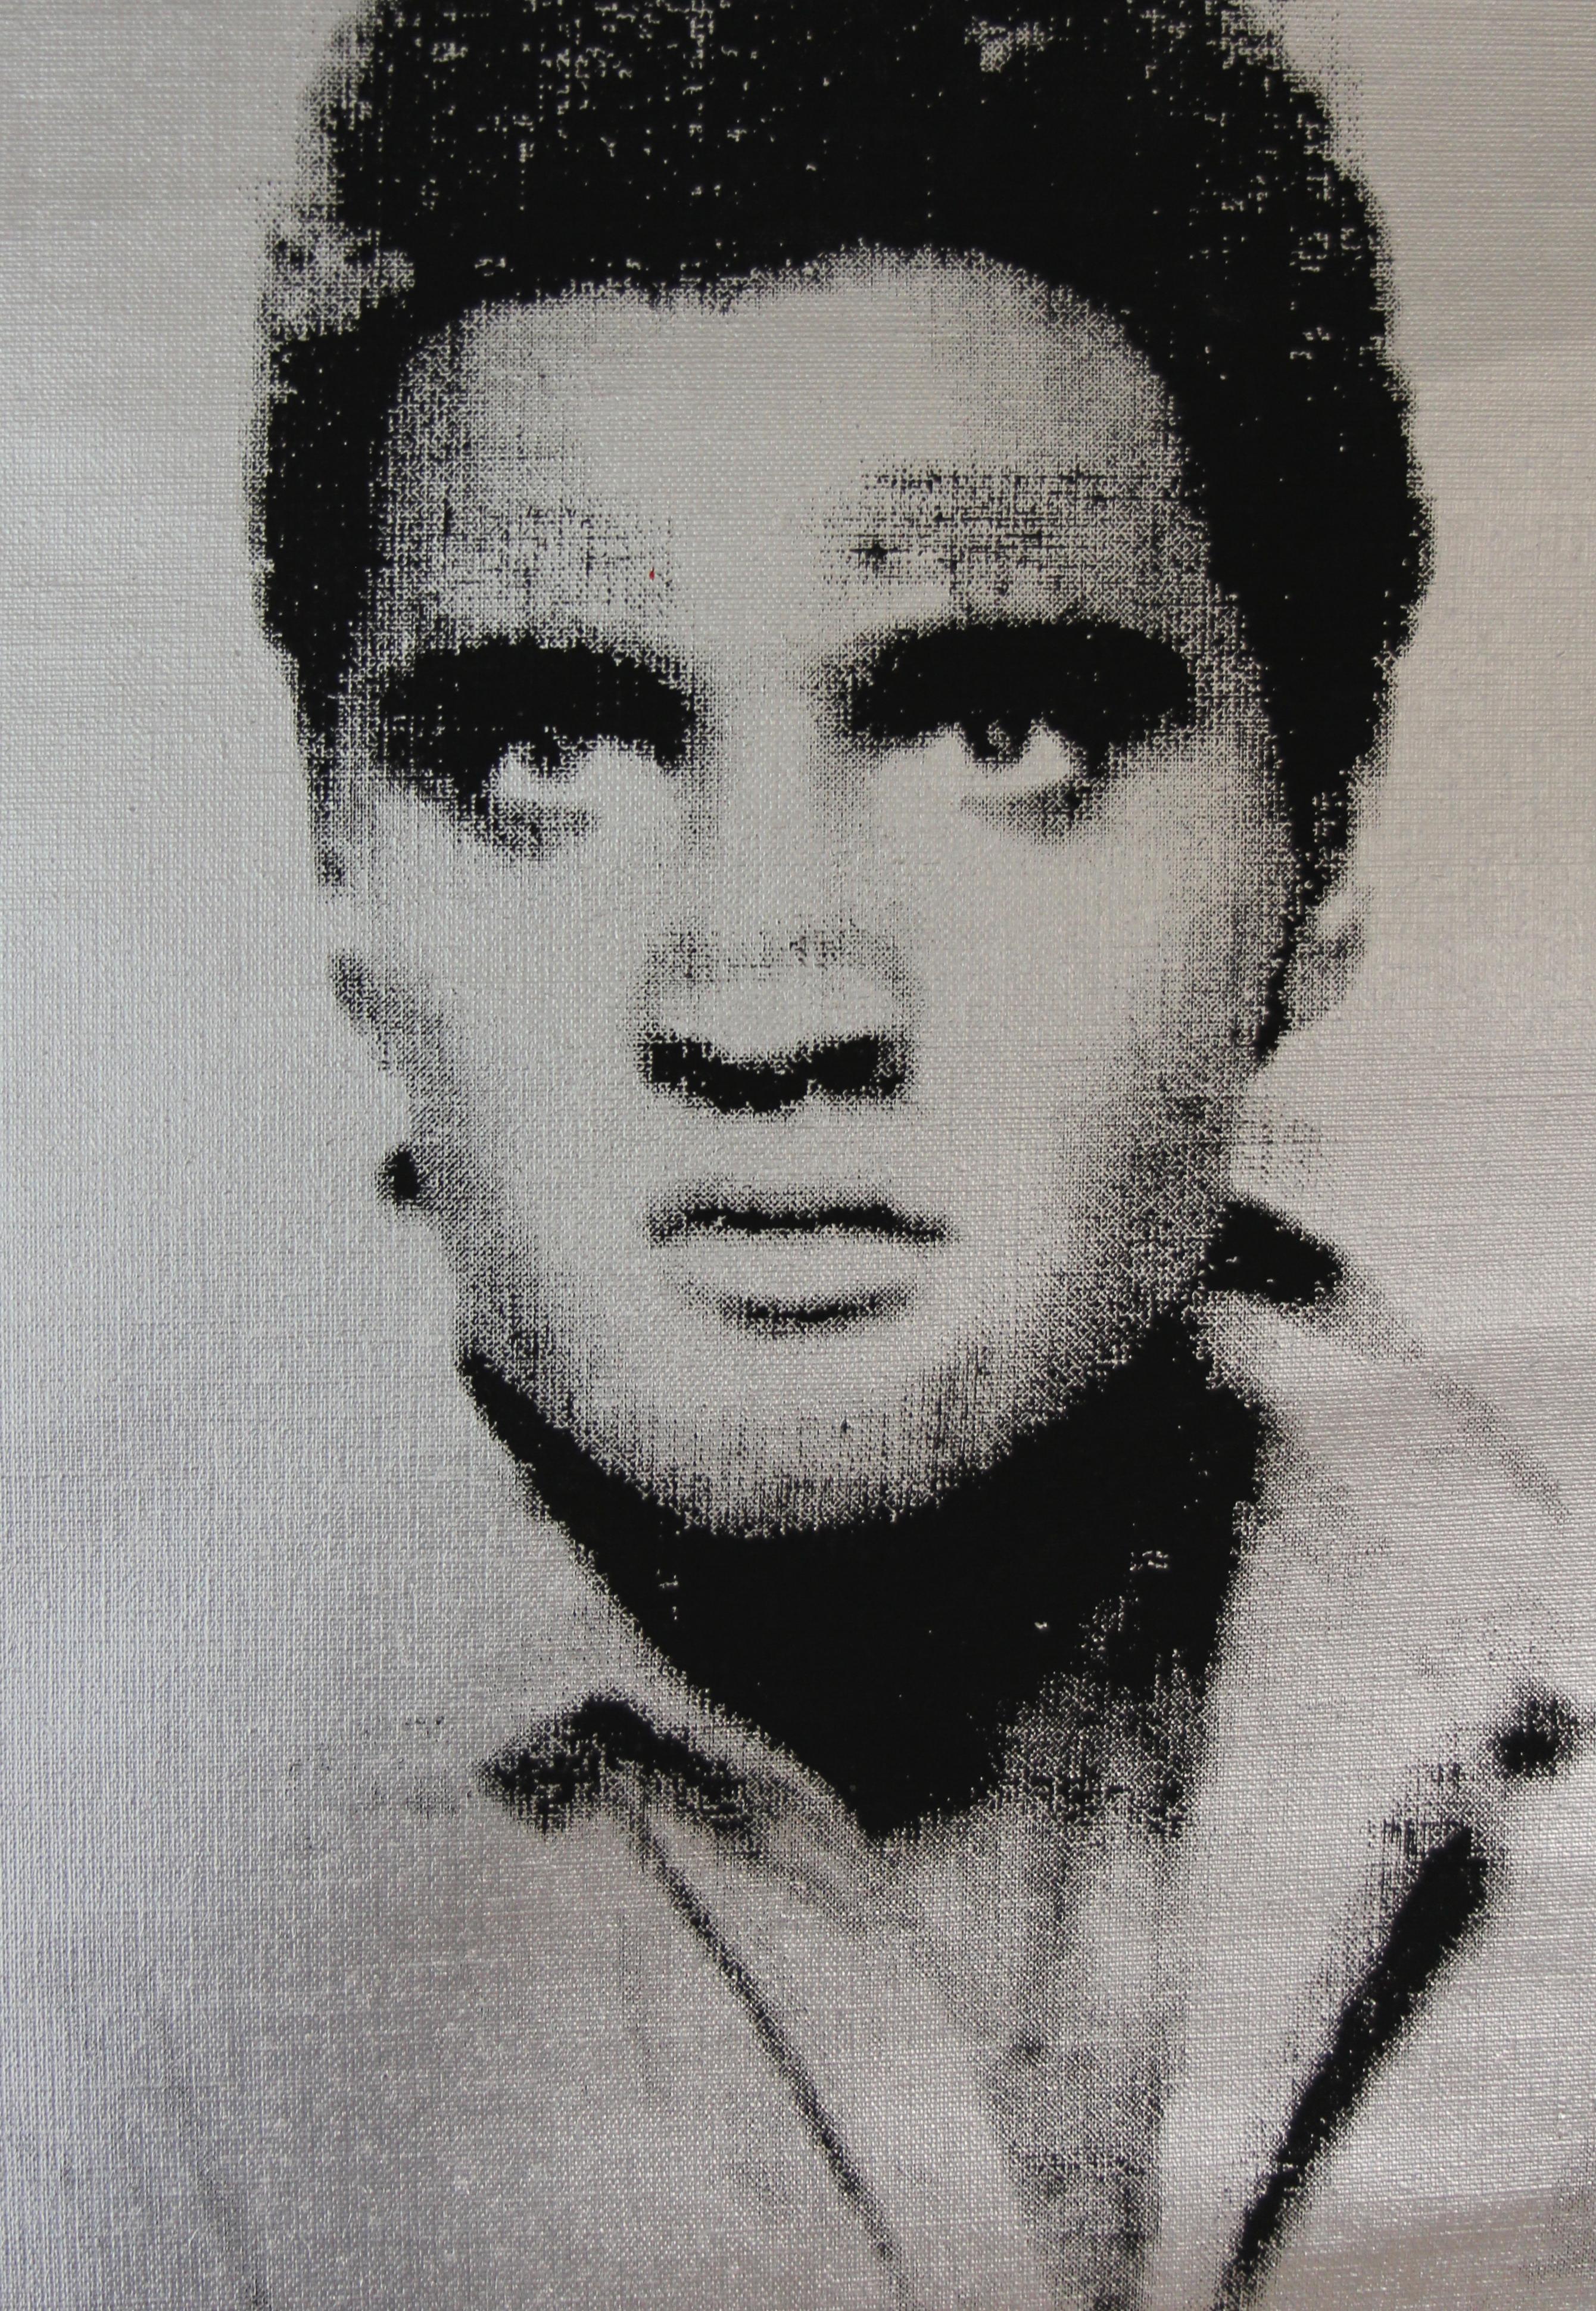 Elvis, Metallic Silver and Black Full Length Silkscreen Painting by Charles Lutz
Silkscreen and silver enamel painted on vintage 1960's era linen with Artist's Denied stamp of the Andy Warhol Art Authentication Board.
82